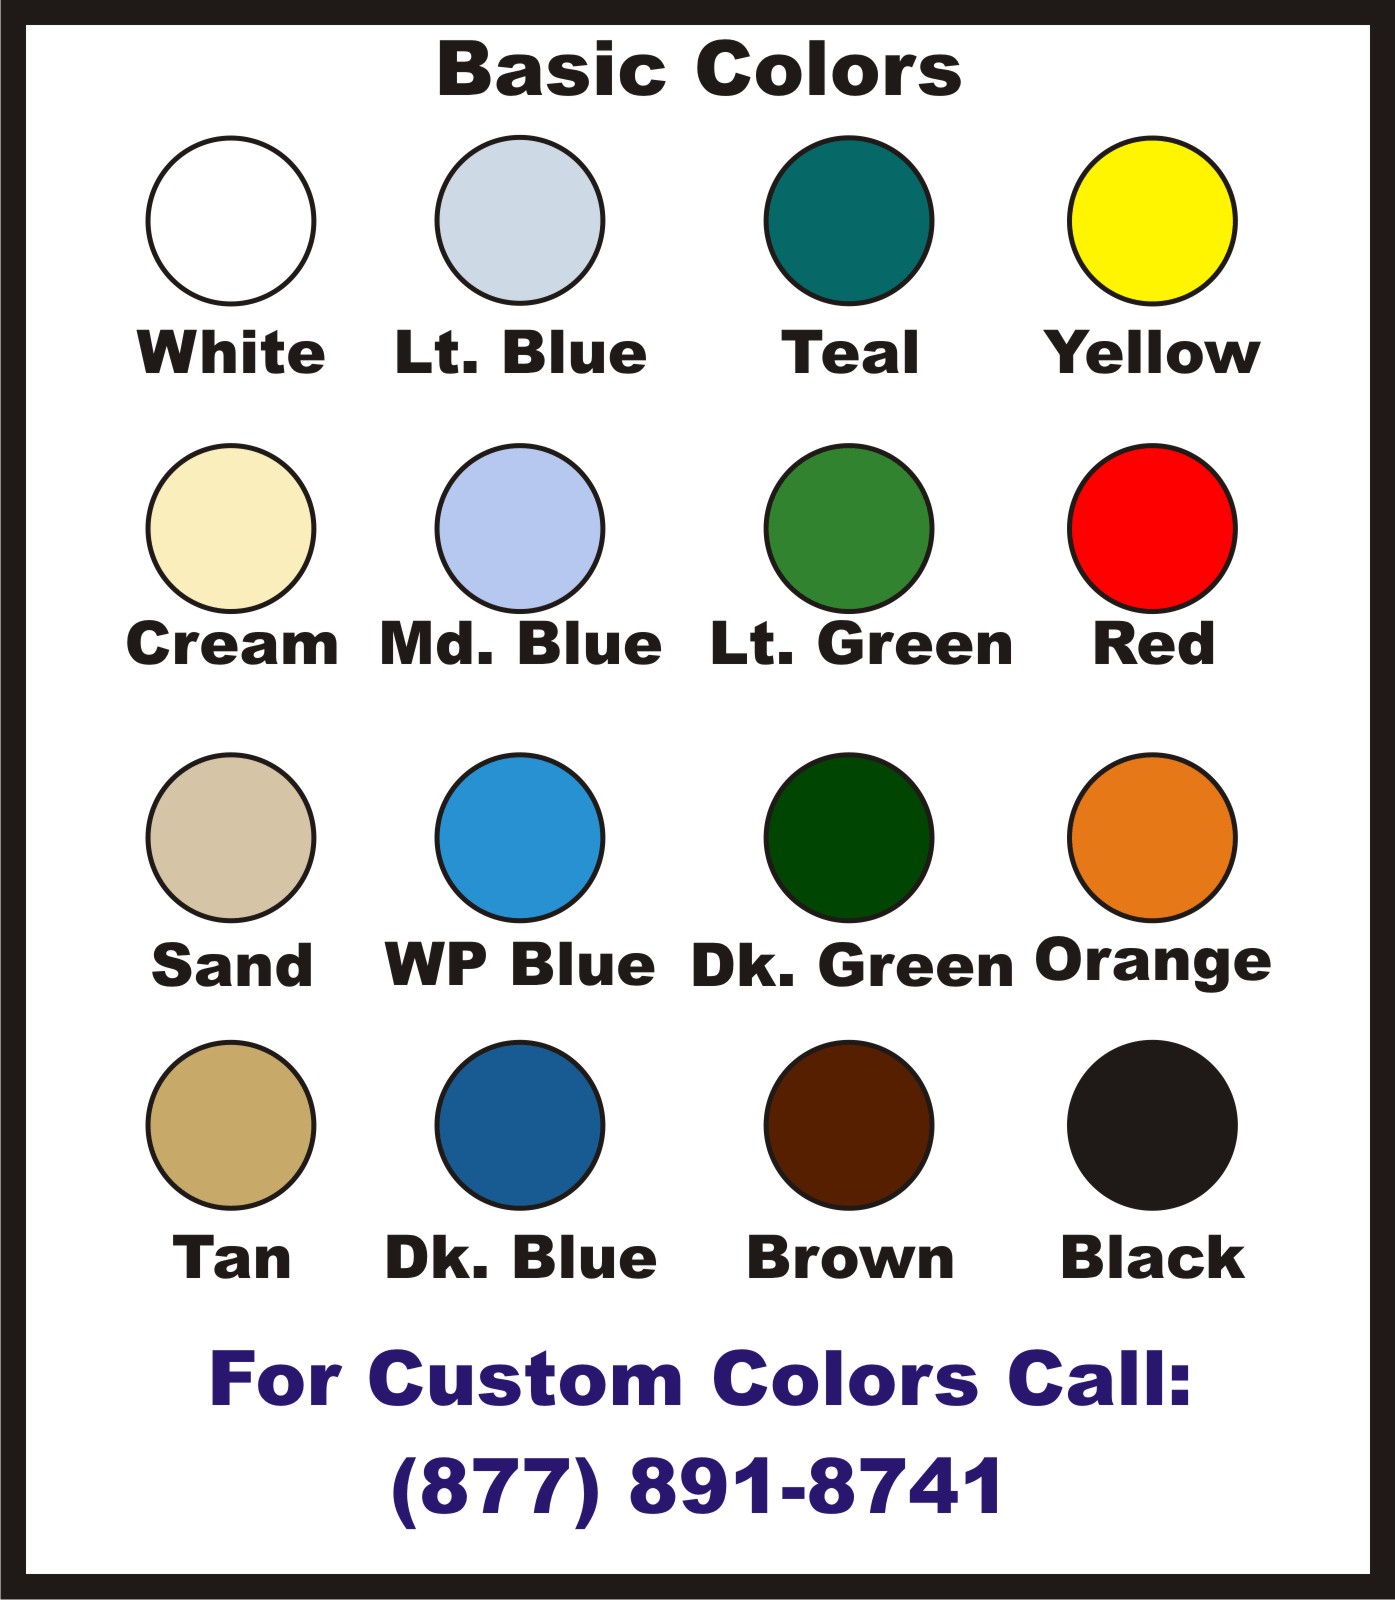 spray-lining color chart